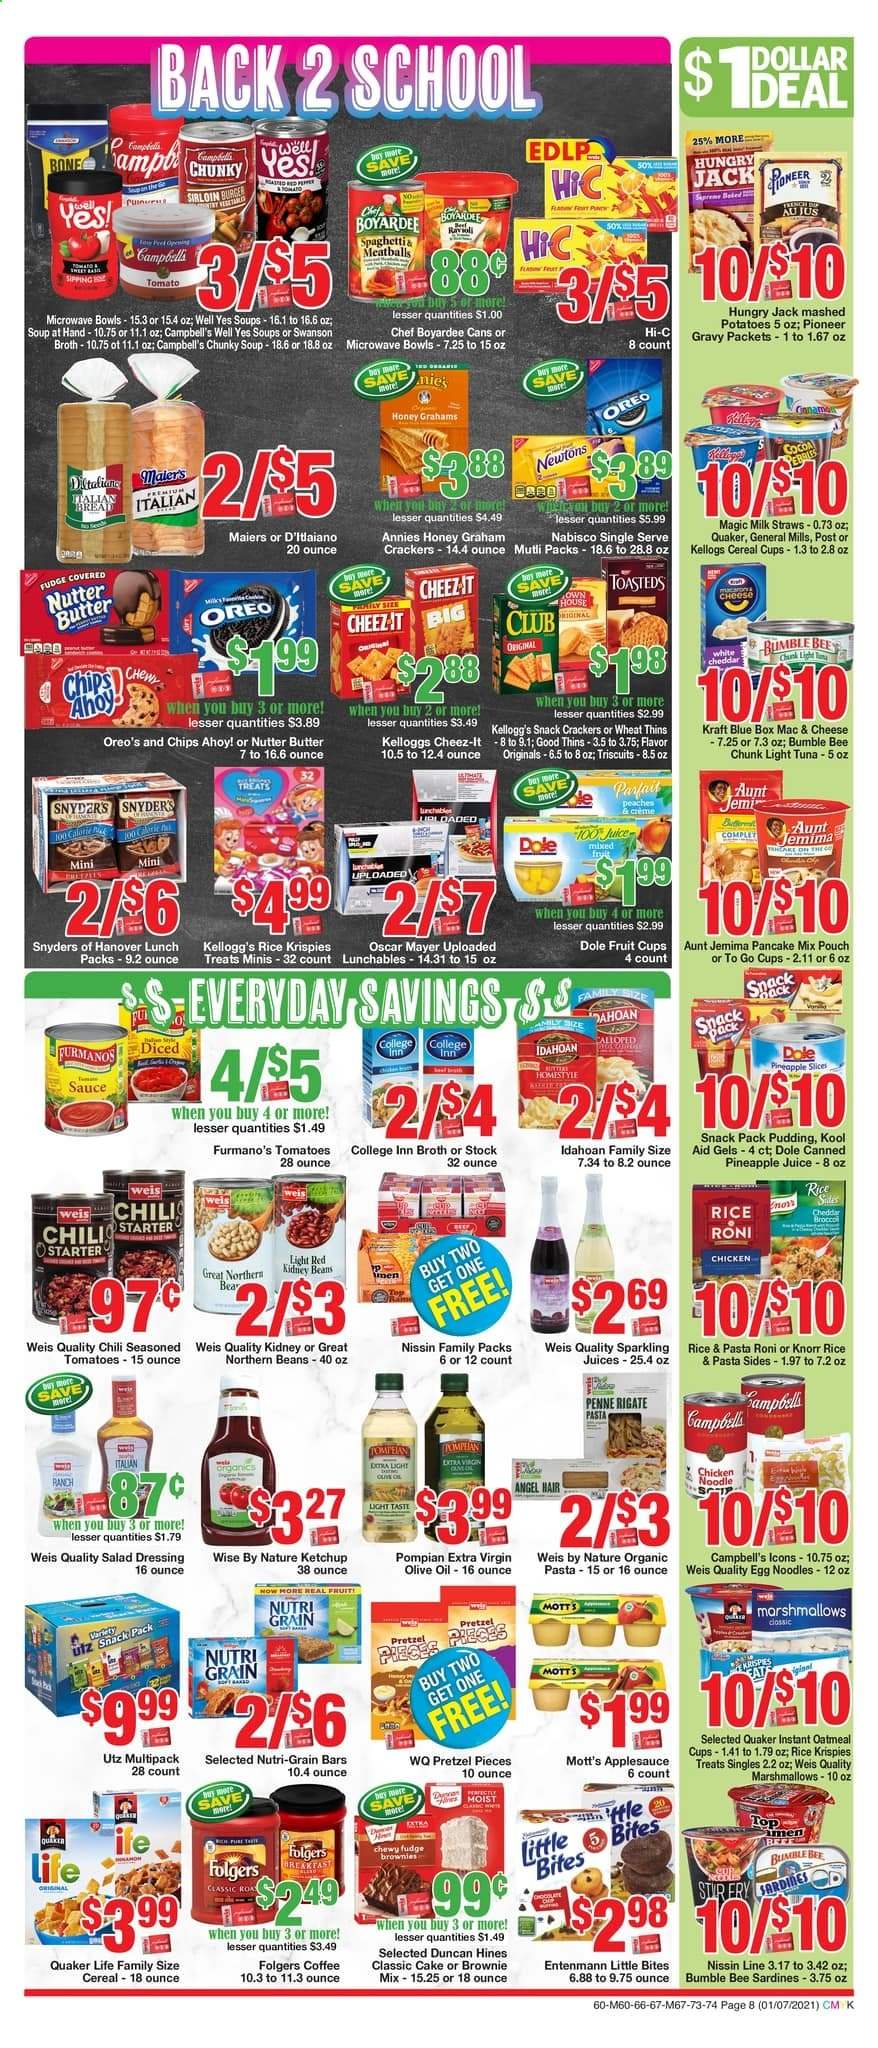 thumbnail - Weis Flyer - 01/07/2021 - 02/04/2021 - Sales products - Dole, fruit cup, pretzels, brownie mix, cake, pancakes, Little Bites, sardines, tuna, Campbell's, macaroni & cheese, mashed potatoes, meatballs, soup, Knorr, sauce, Quaker, pasta sides, Lunchables, Kraft®, Nissin, Oscar Mayer, cheddar, pudding, Oreo, milk, butter, beans, fudge, graham crackers, marshmallows, crackers, Kellogg's, Chips Ahoy!, chips, Thins, Cheez-It, cocoa, oatmeal, broth, kidney beans, light tuna, Chef Boyardee, cereals, Rice Krispies, Nutri-Grain, egg noodles, pasta, noodles, penne, salad dressing, ketchup, dressing, extra virgin olive oil, olive oil, apple sauce, honey, pineapple juice, Hi-c, sparkling juice, Mott's, coffee, Folgers, straw, pineapple. Page 8.